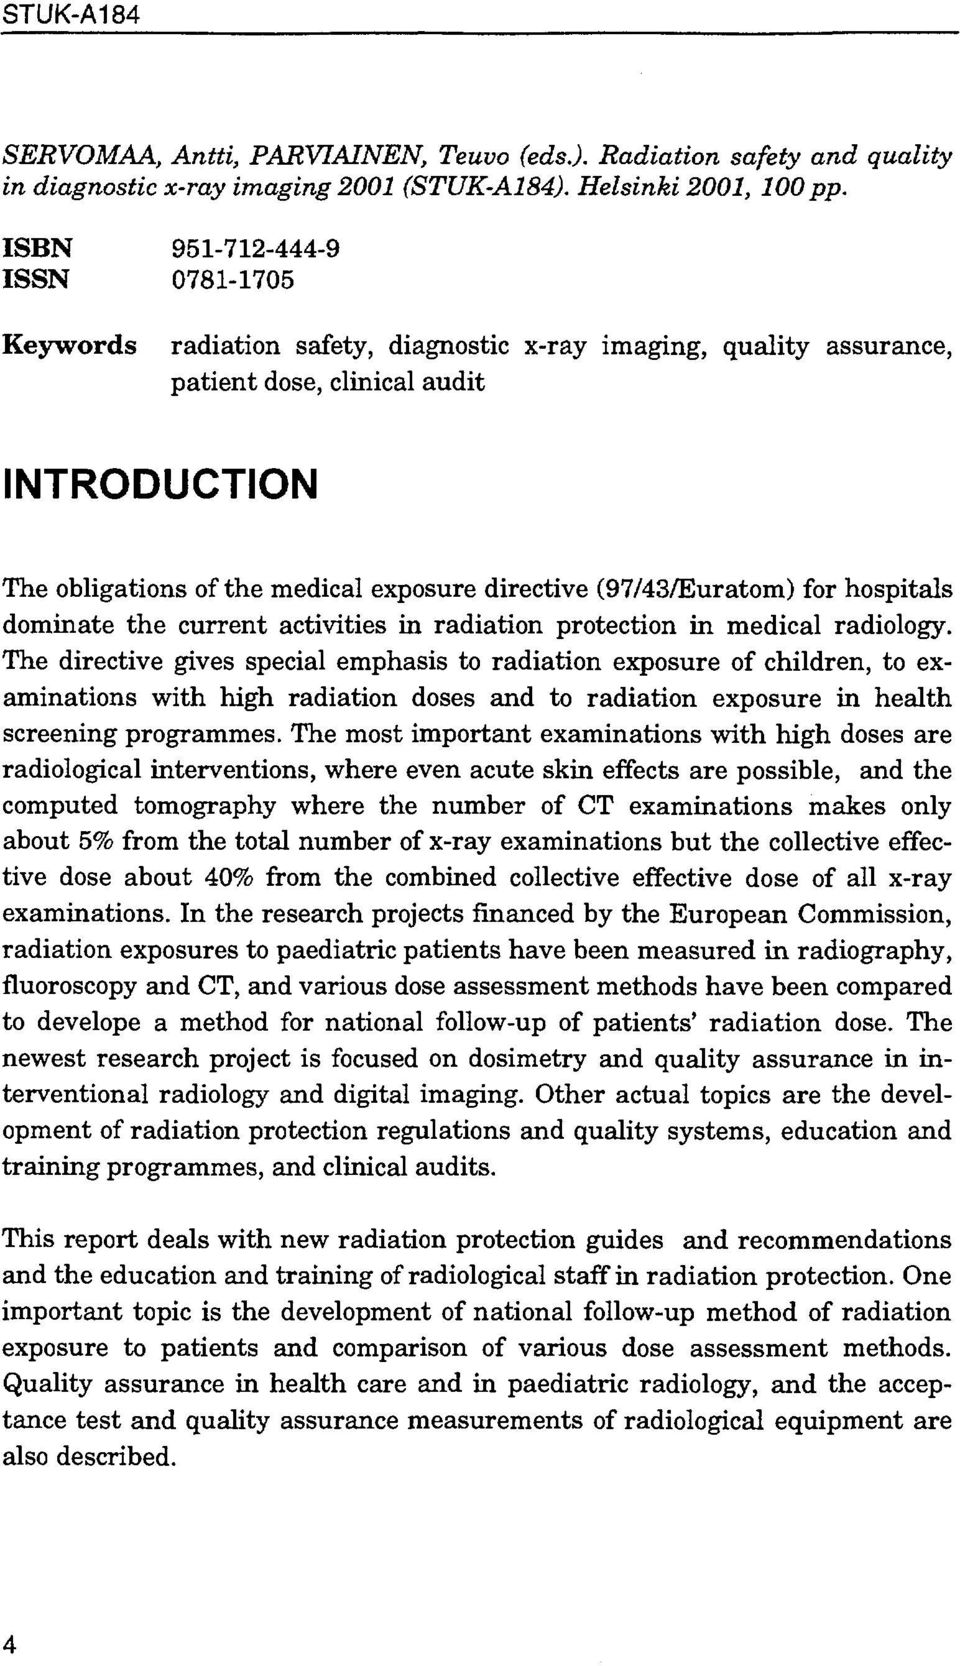 (97/43/Euratom) for hospitals dominate the current activities in radiation protection in medical radiology.